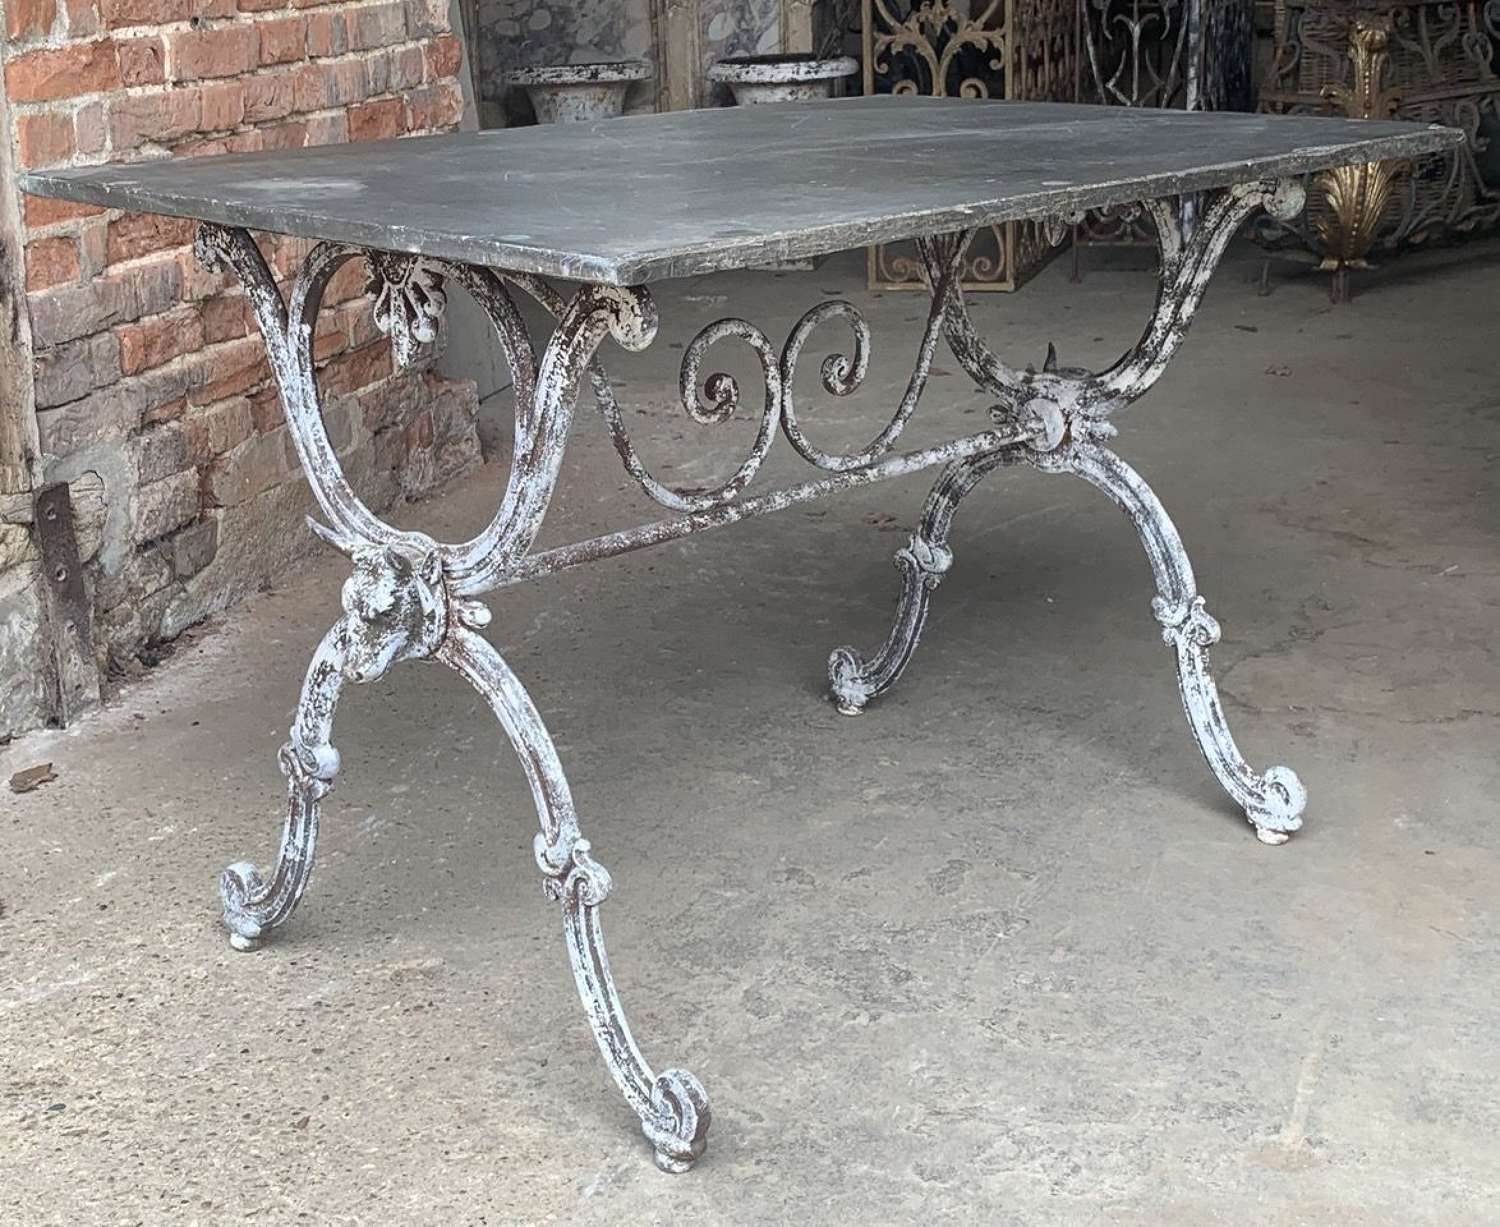 ANTIQUE FRENCH BUTCHER'S TABLE